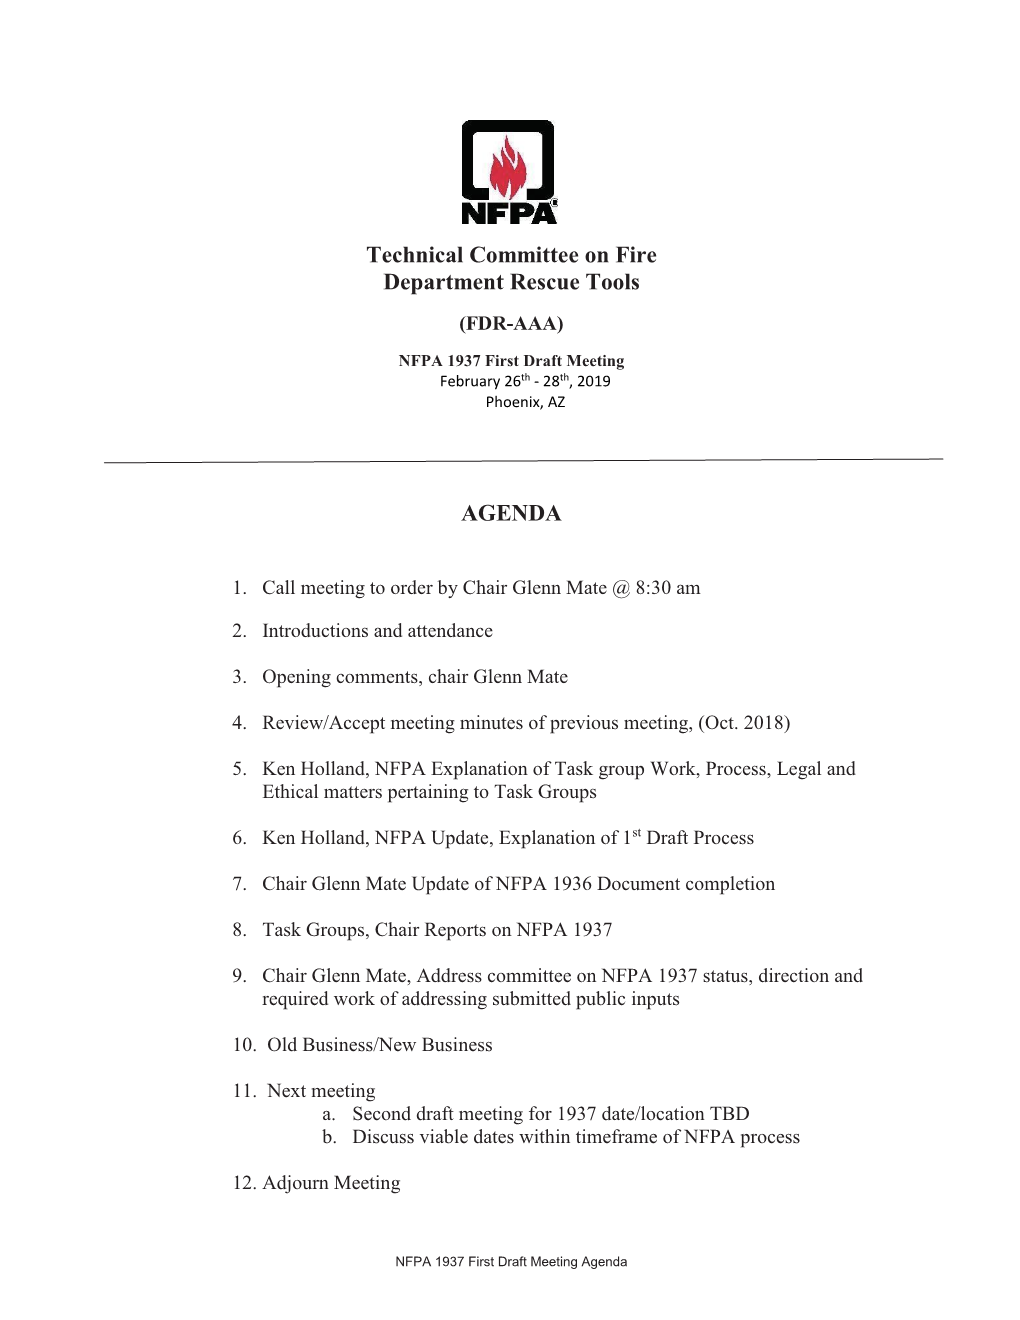 Technical Committee on Fire Department Rescue Tools AGENDA